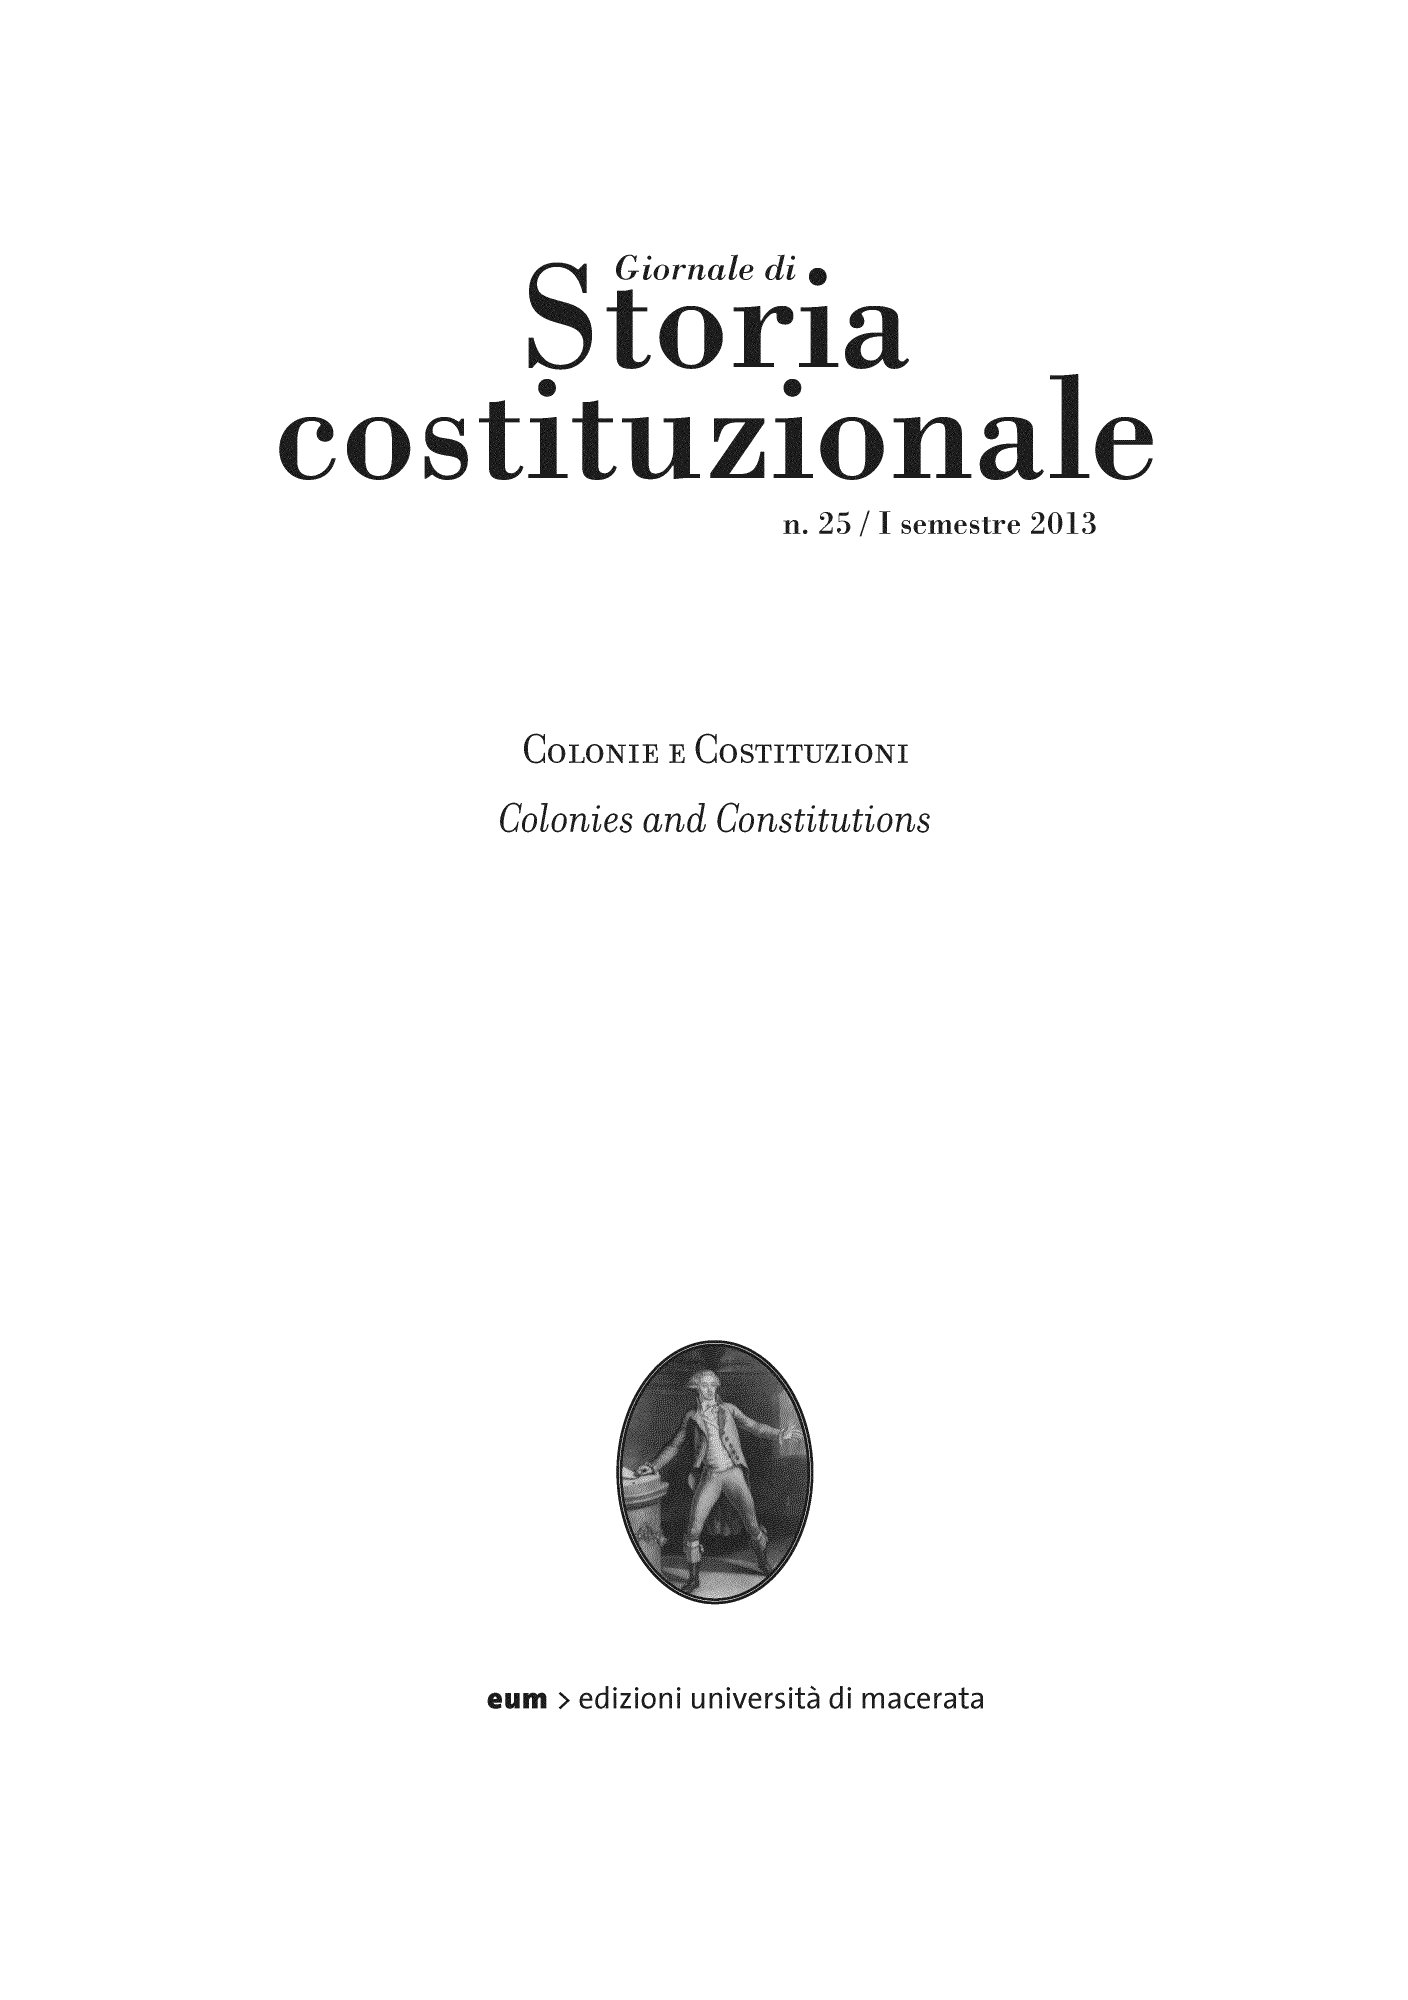 handle is hein.journals/giordi25 and id is 1 raw text is: Glornae di
Stbri~a
co stituzi-onale
n. 25 / I semestre 2013
COLONIE E COSTITUZIONI
Colonies and Constitutions

eum 

10 1


